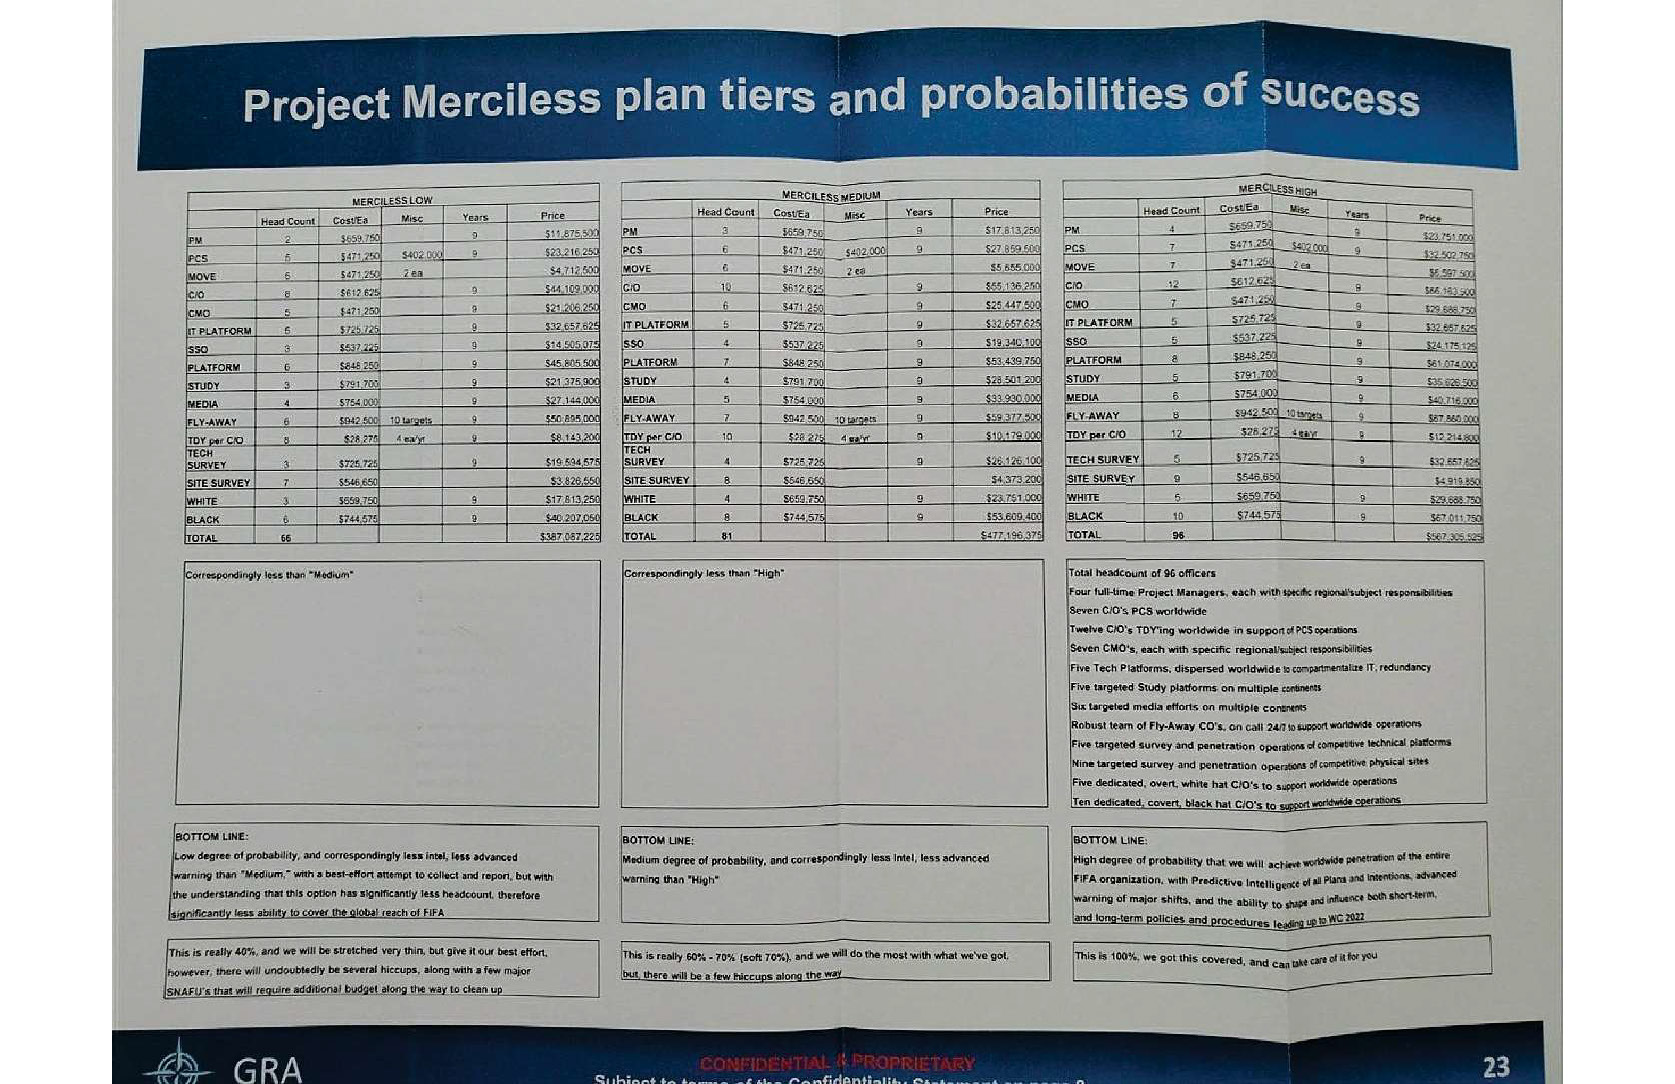 Project Merciless information